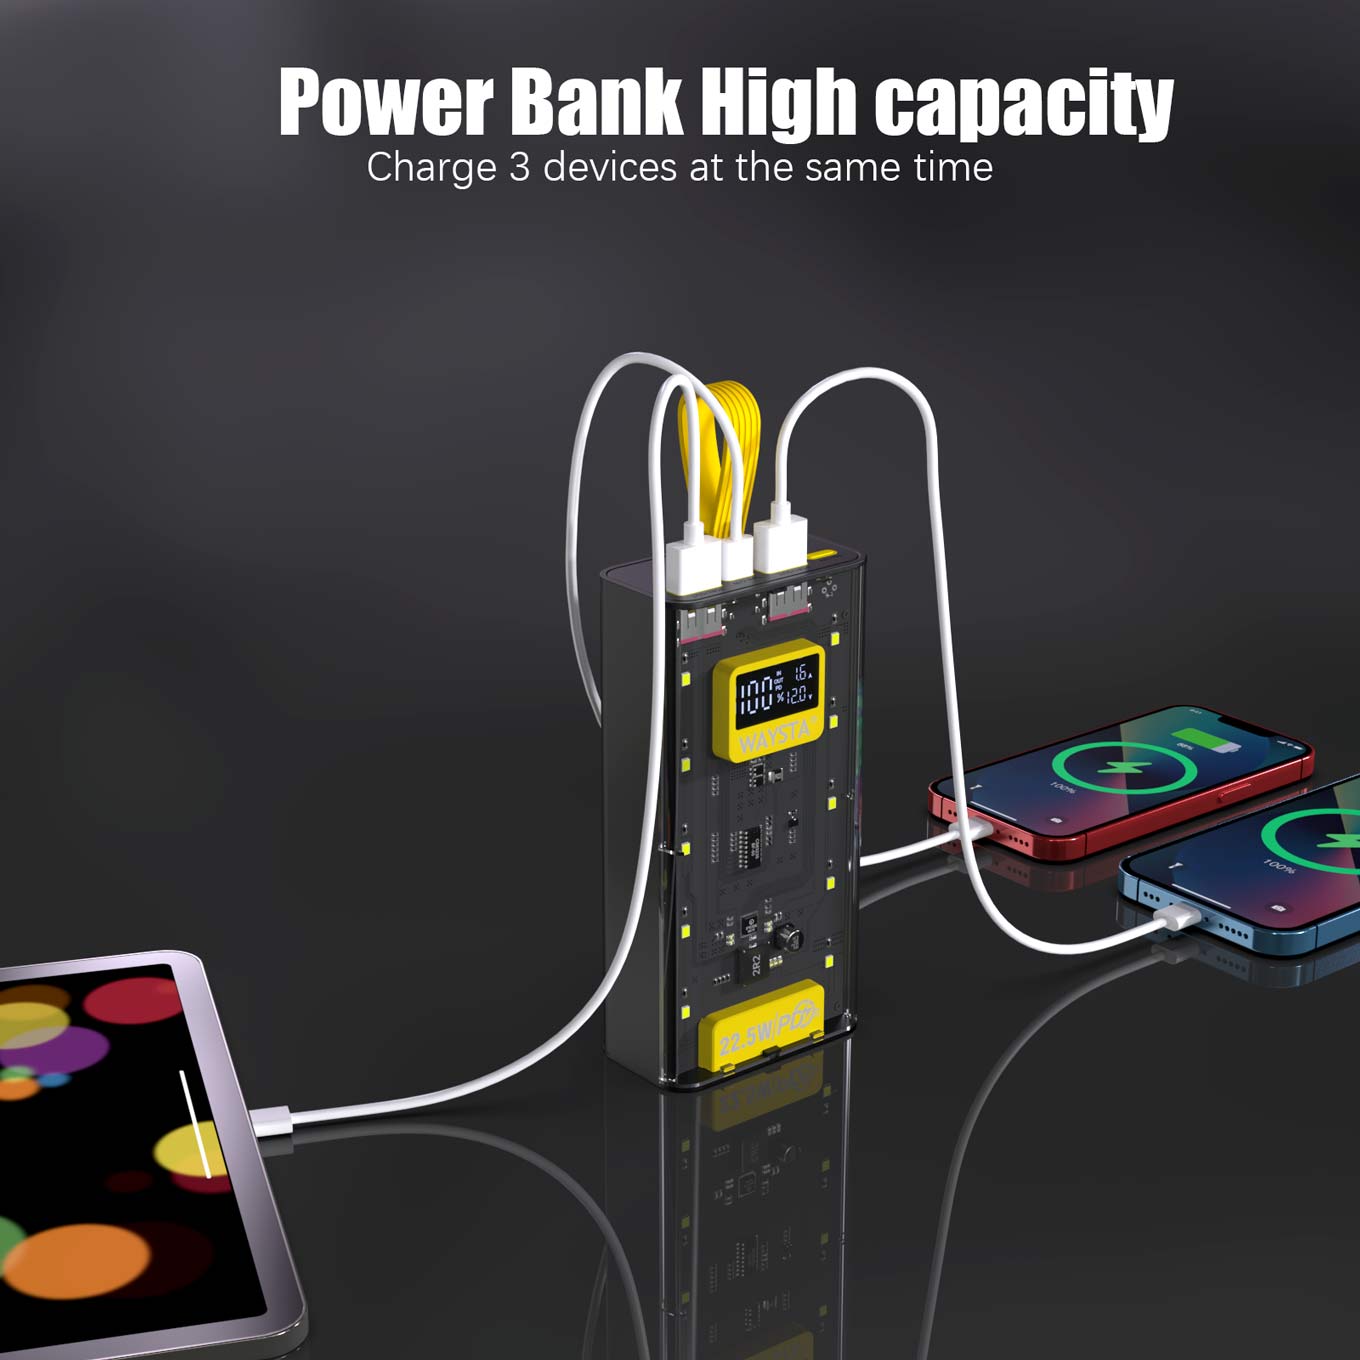 Power Bank- 26800mAh, QC 3.0 22.5W and PD 20W Fast Charge, Powerbank, External Battery Pack, Portable Charger for Smartphones Tablets Cameras etc.